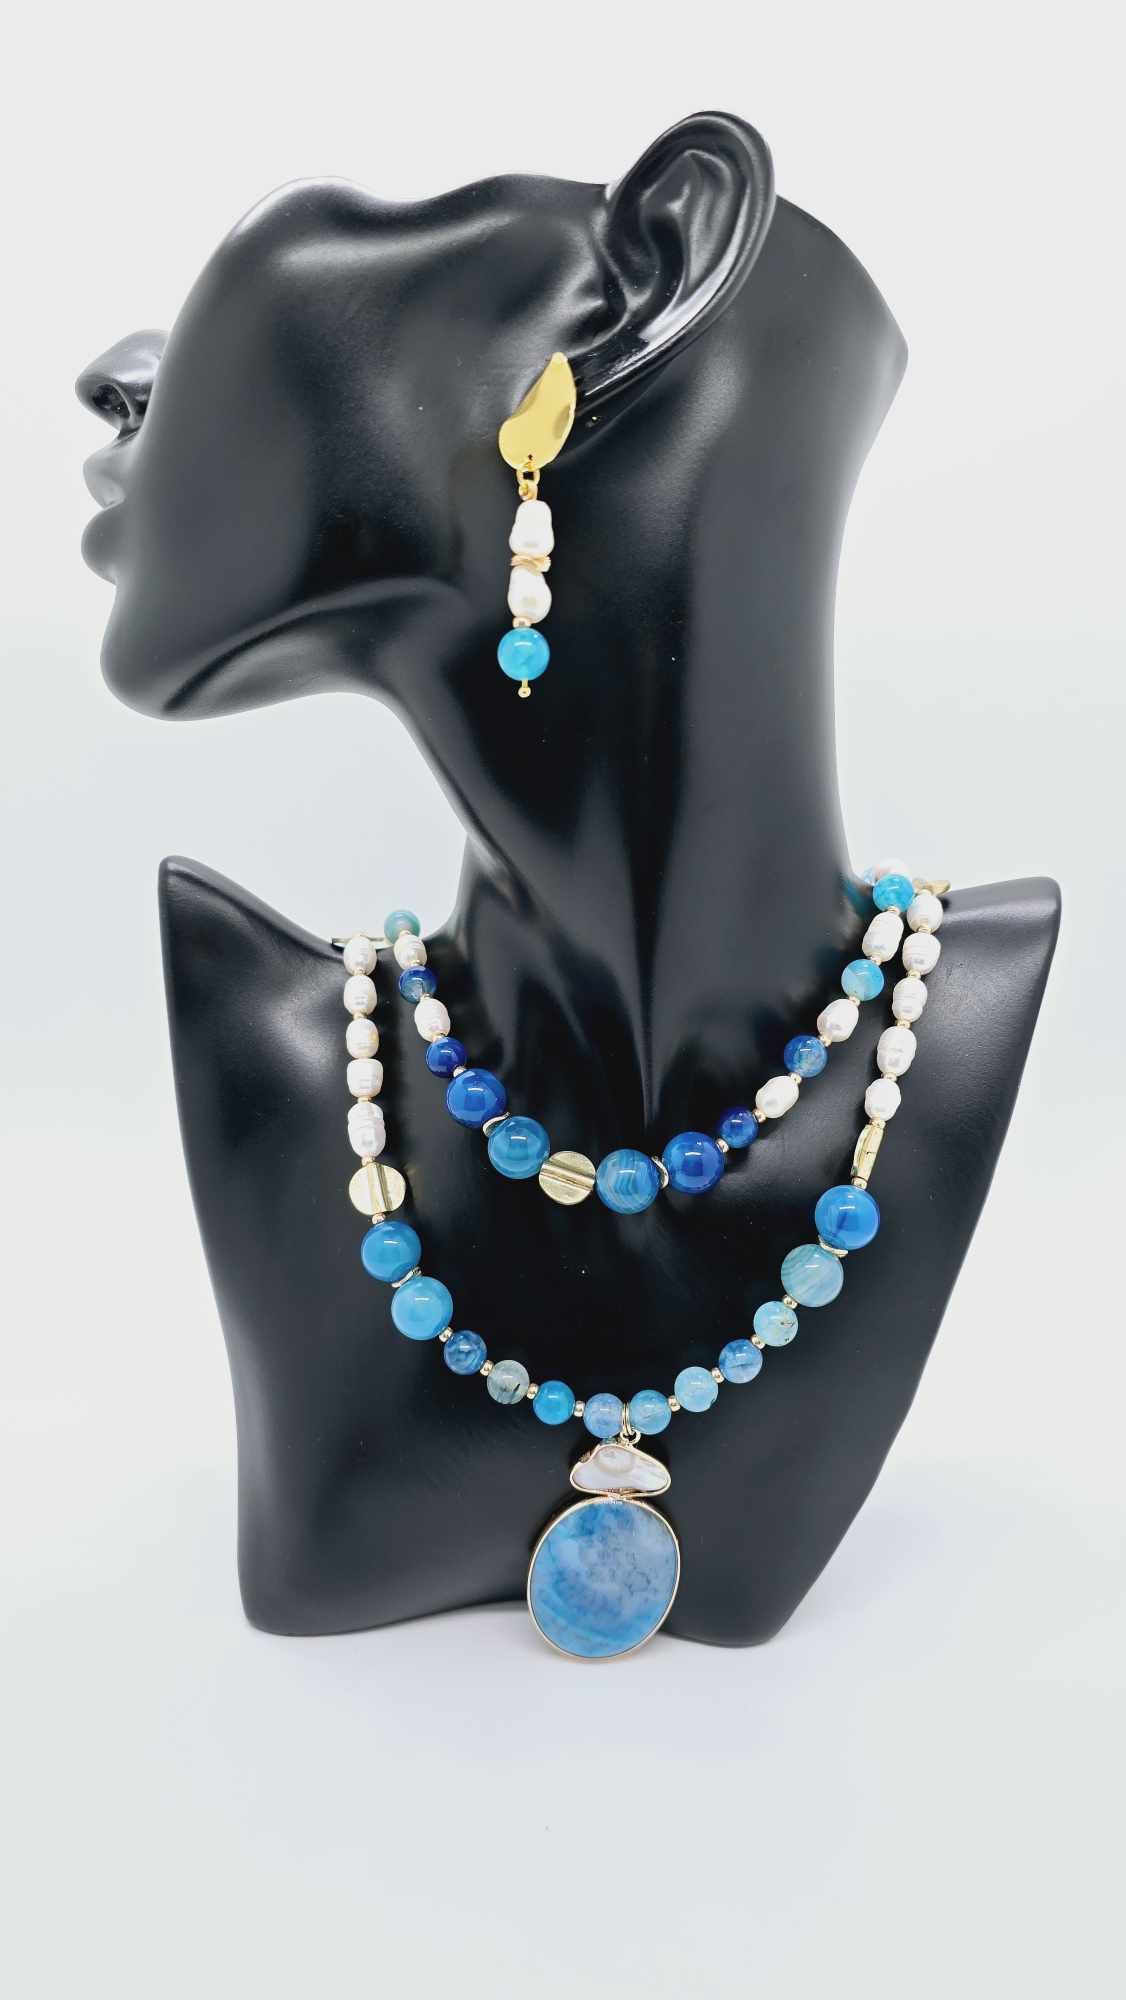 Lake blue agate and freshwater pearl necklace set! (1244 Influencer)